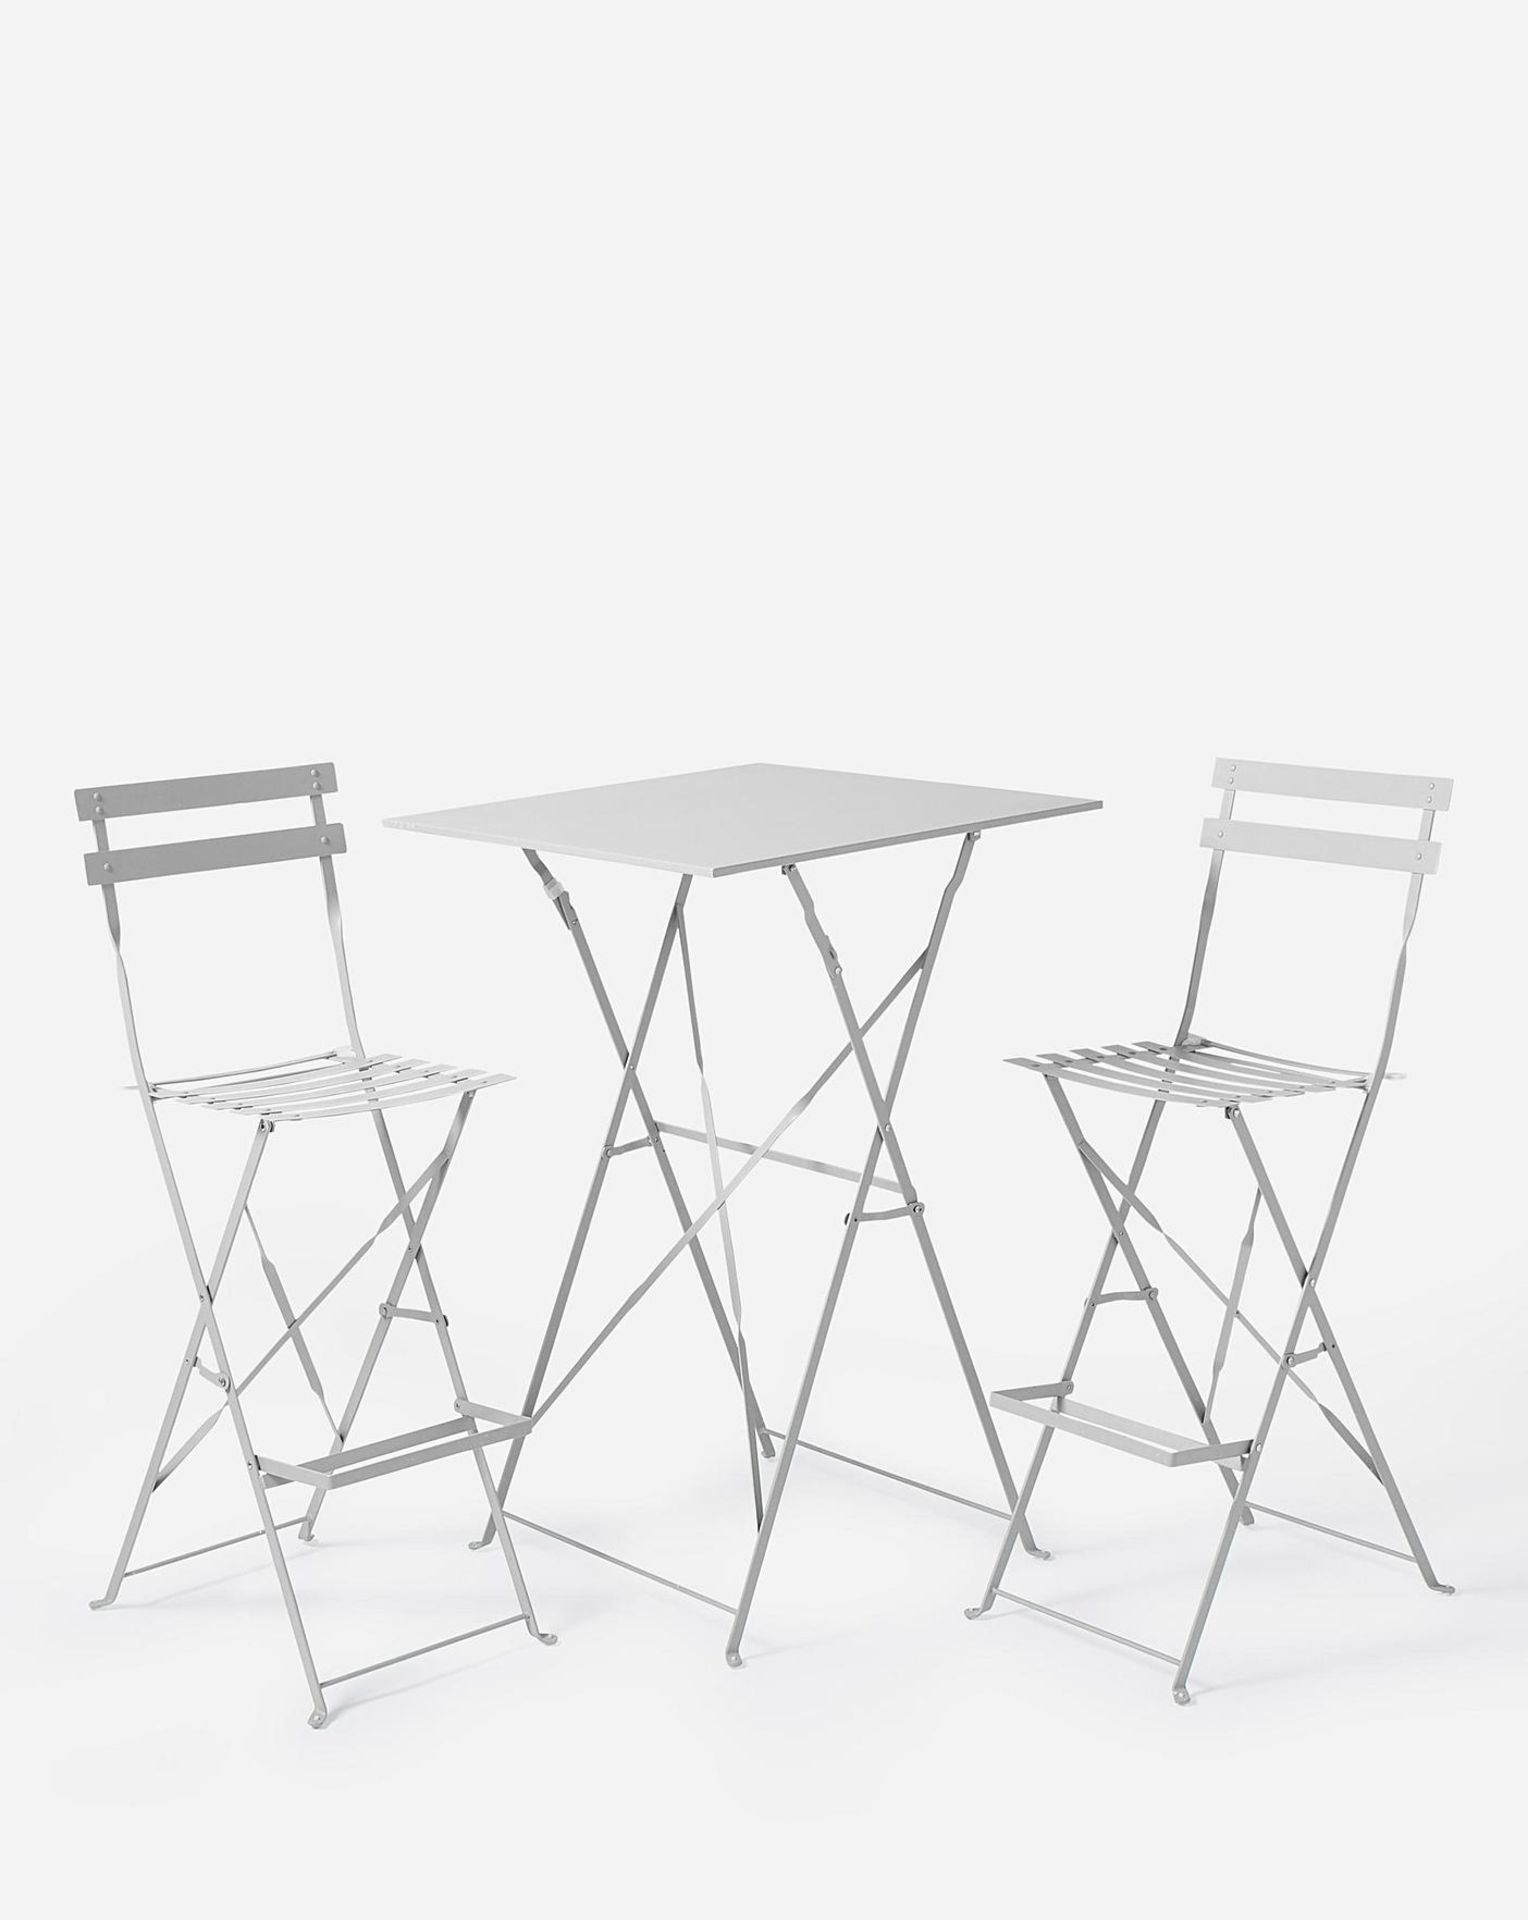 BRAND NEW Palma Bistro Bar Set GREY. RRP £199 EACH. Liven up your garden or balcony with this pretty - Image 2 of 2